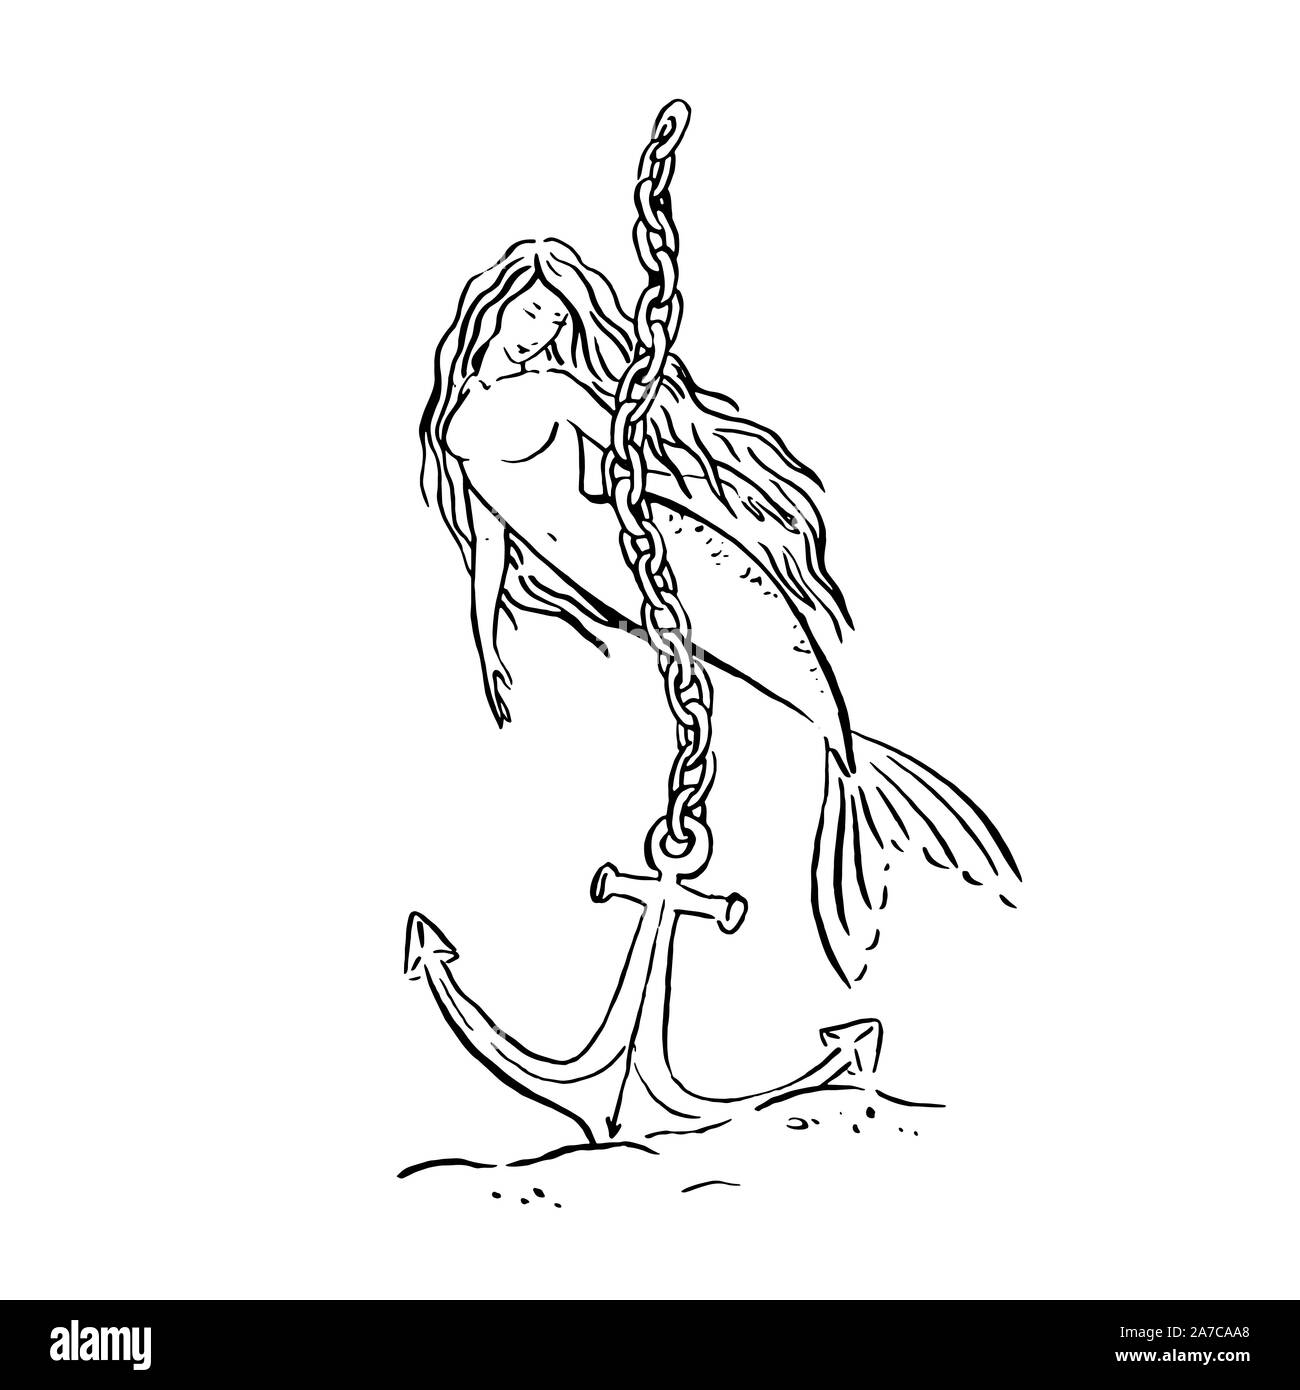 Download Vector Mermaid Illustration Black Isolated On White Coloring Page Or Fairy Tale Illustration Mermaid Swimming Around Anchor With Chain Stock Vector Image Art Alamy